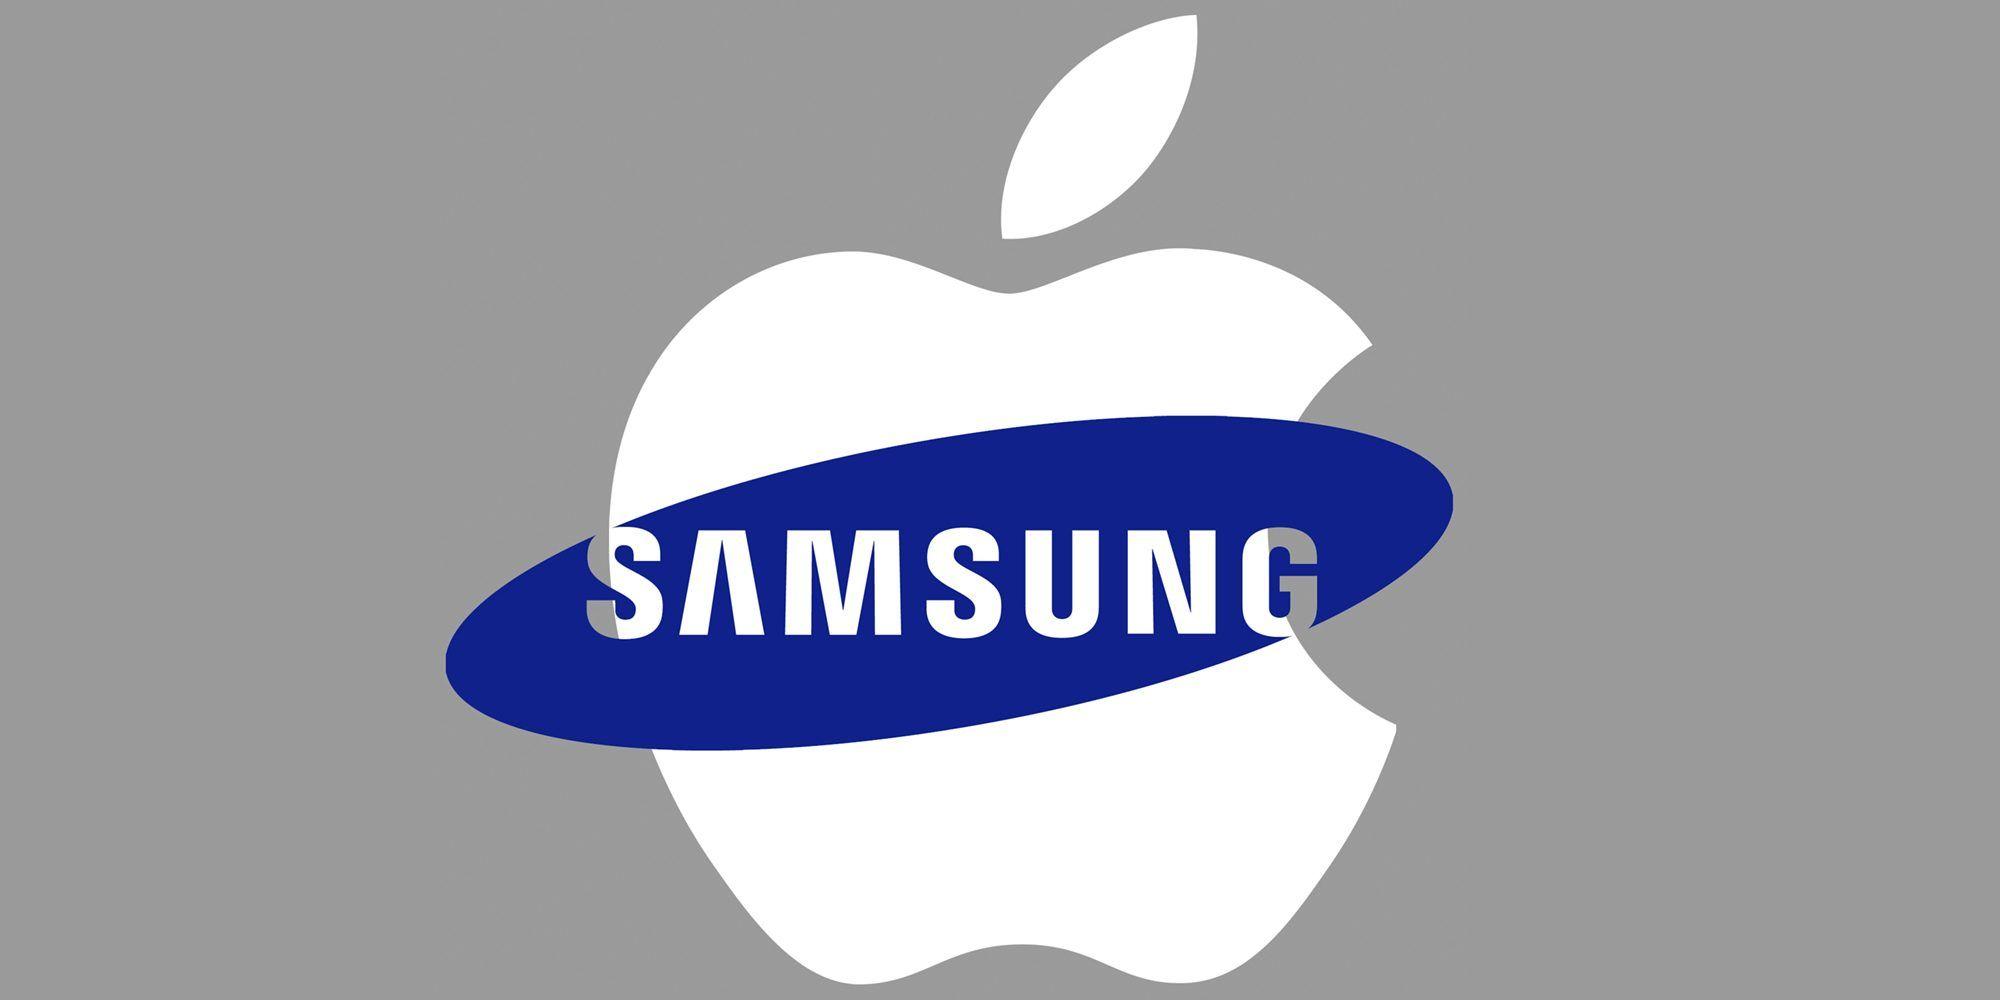 Samsung Smartphone Logo - Samsung Launched 31 Phones Last Year, but Apple Has the Upper Hand